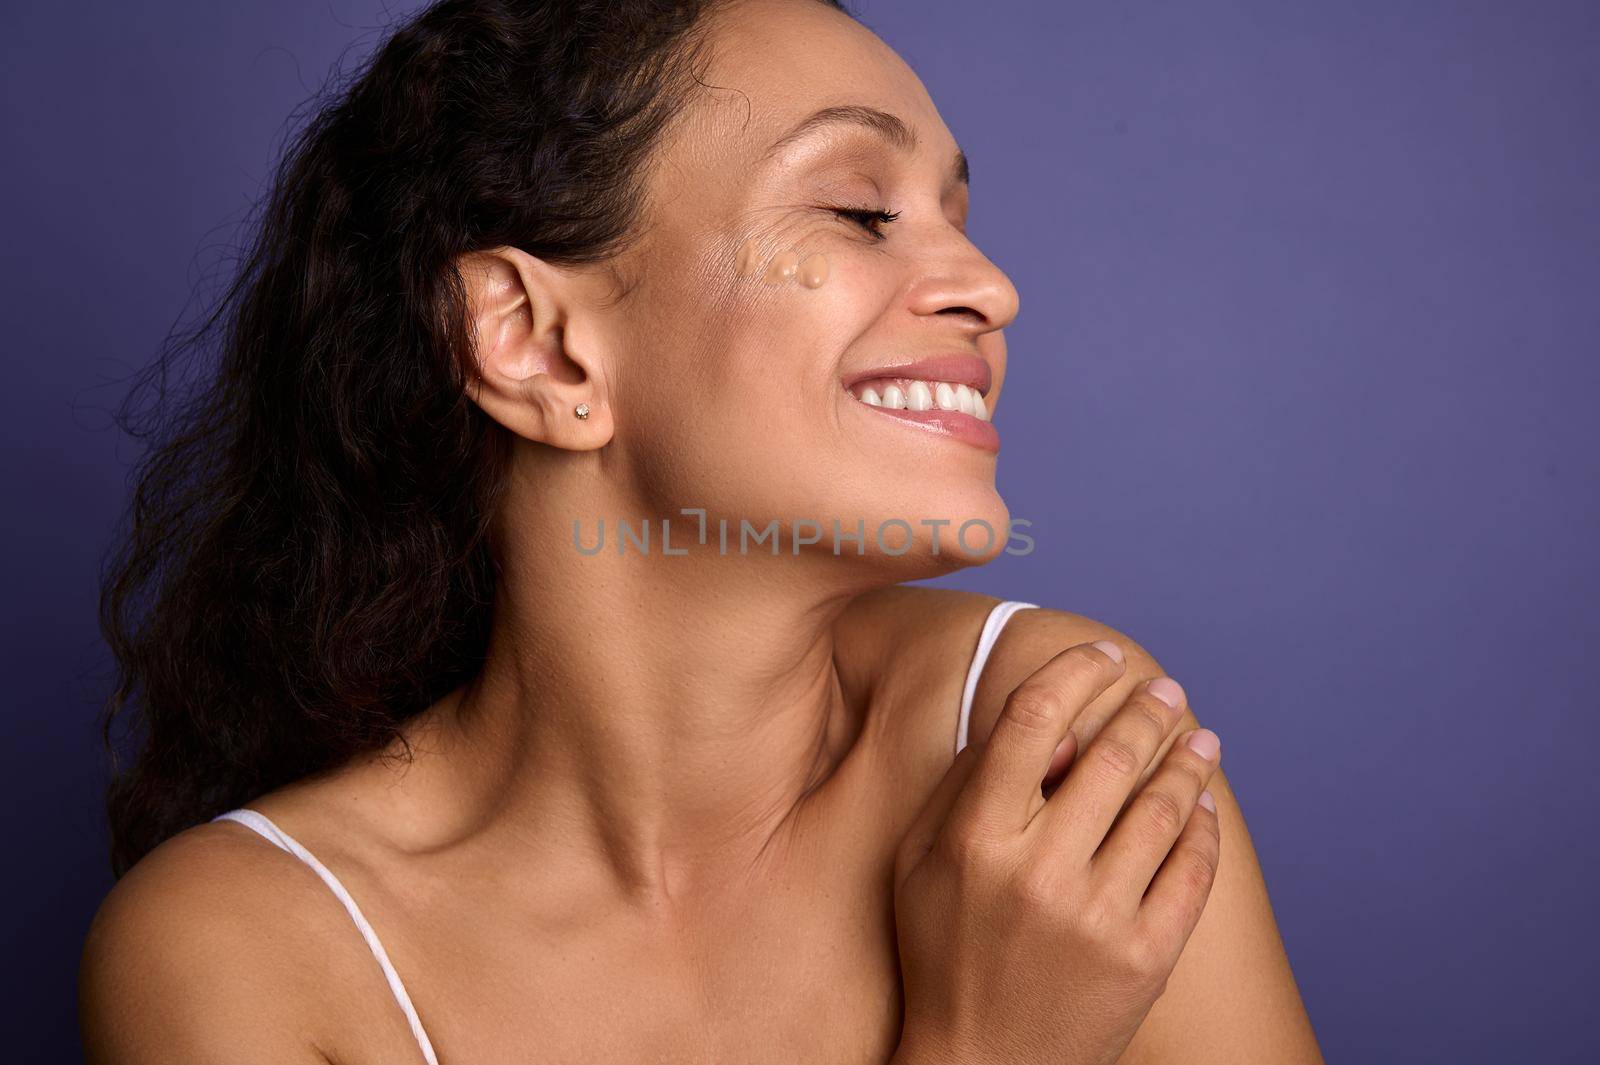 Beautiful dark-haired woman with clean healthy glowing skin posing with spots of liquid tonal foundation on her face, smiles with toothy smile looking aside against violet background with copy space.